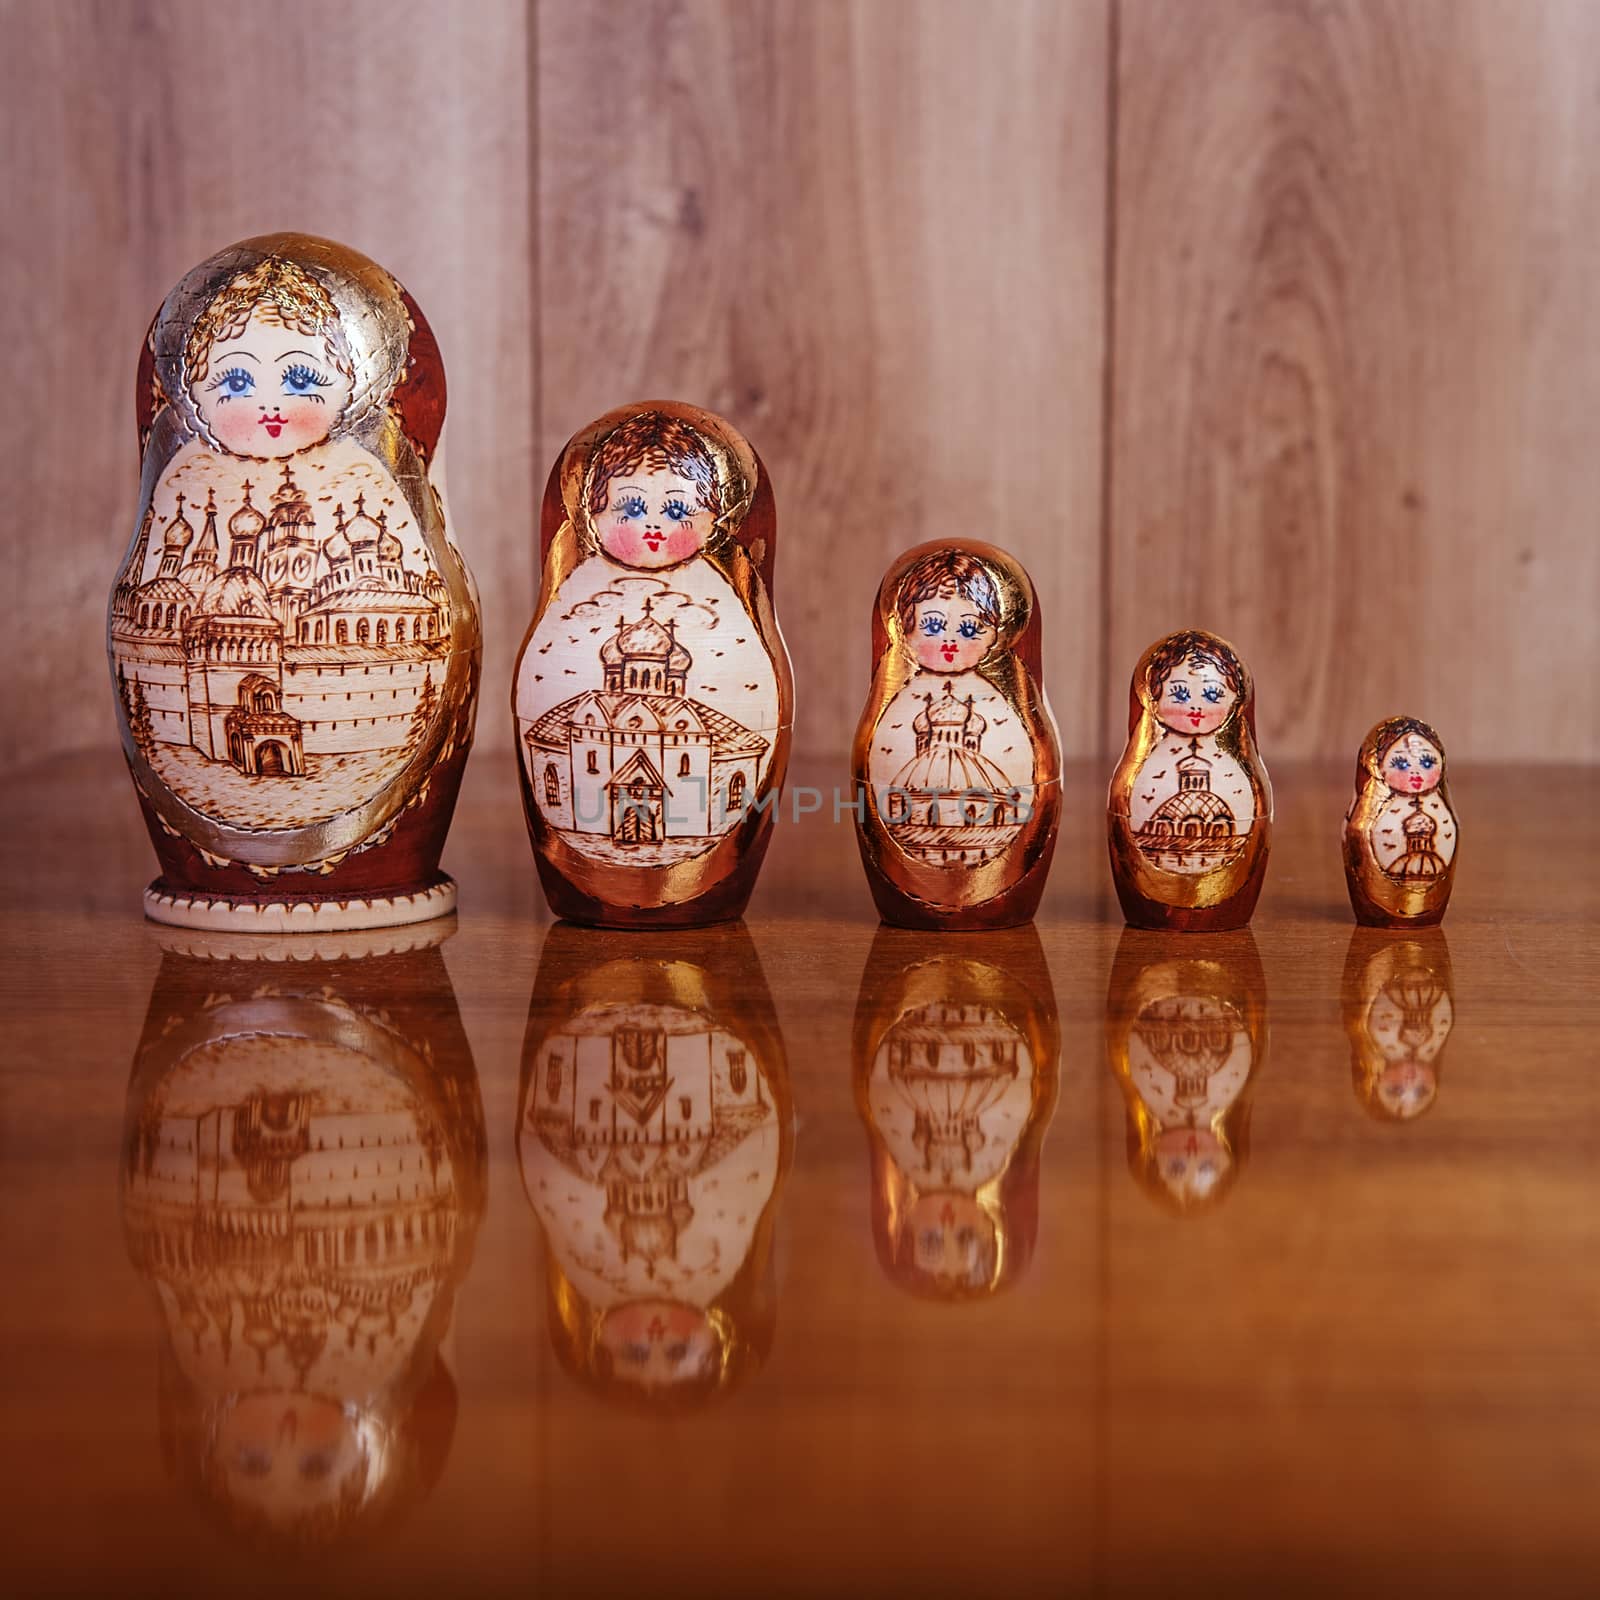 Five dolls on a brown wooden table and a texture on a wooden background